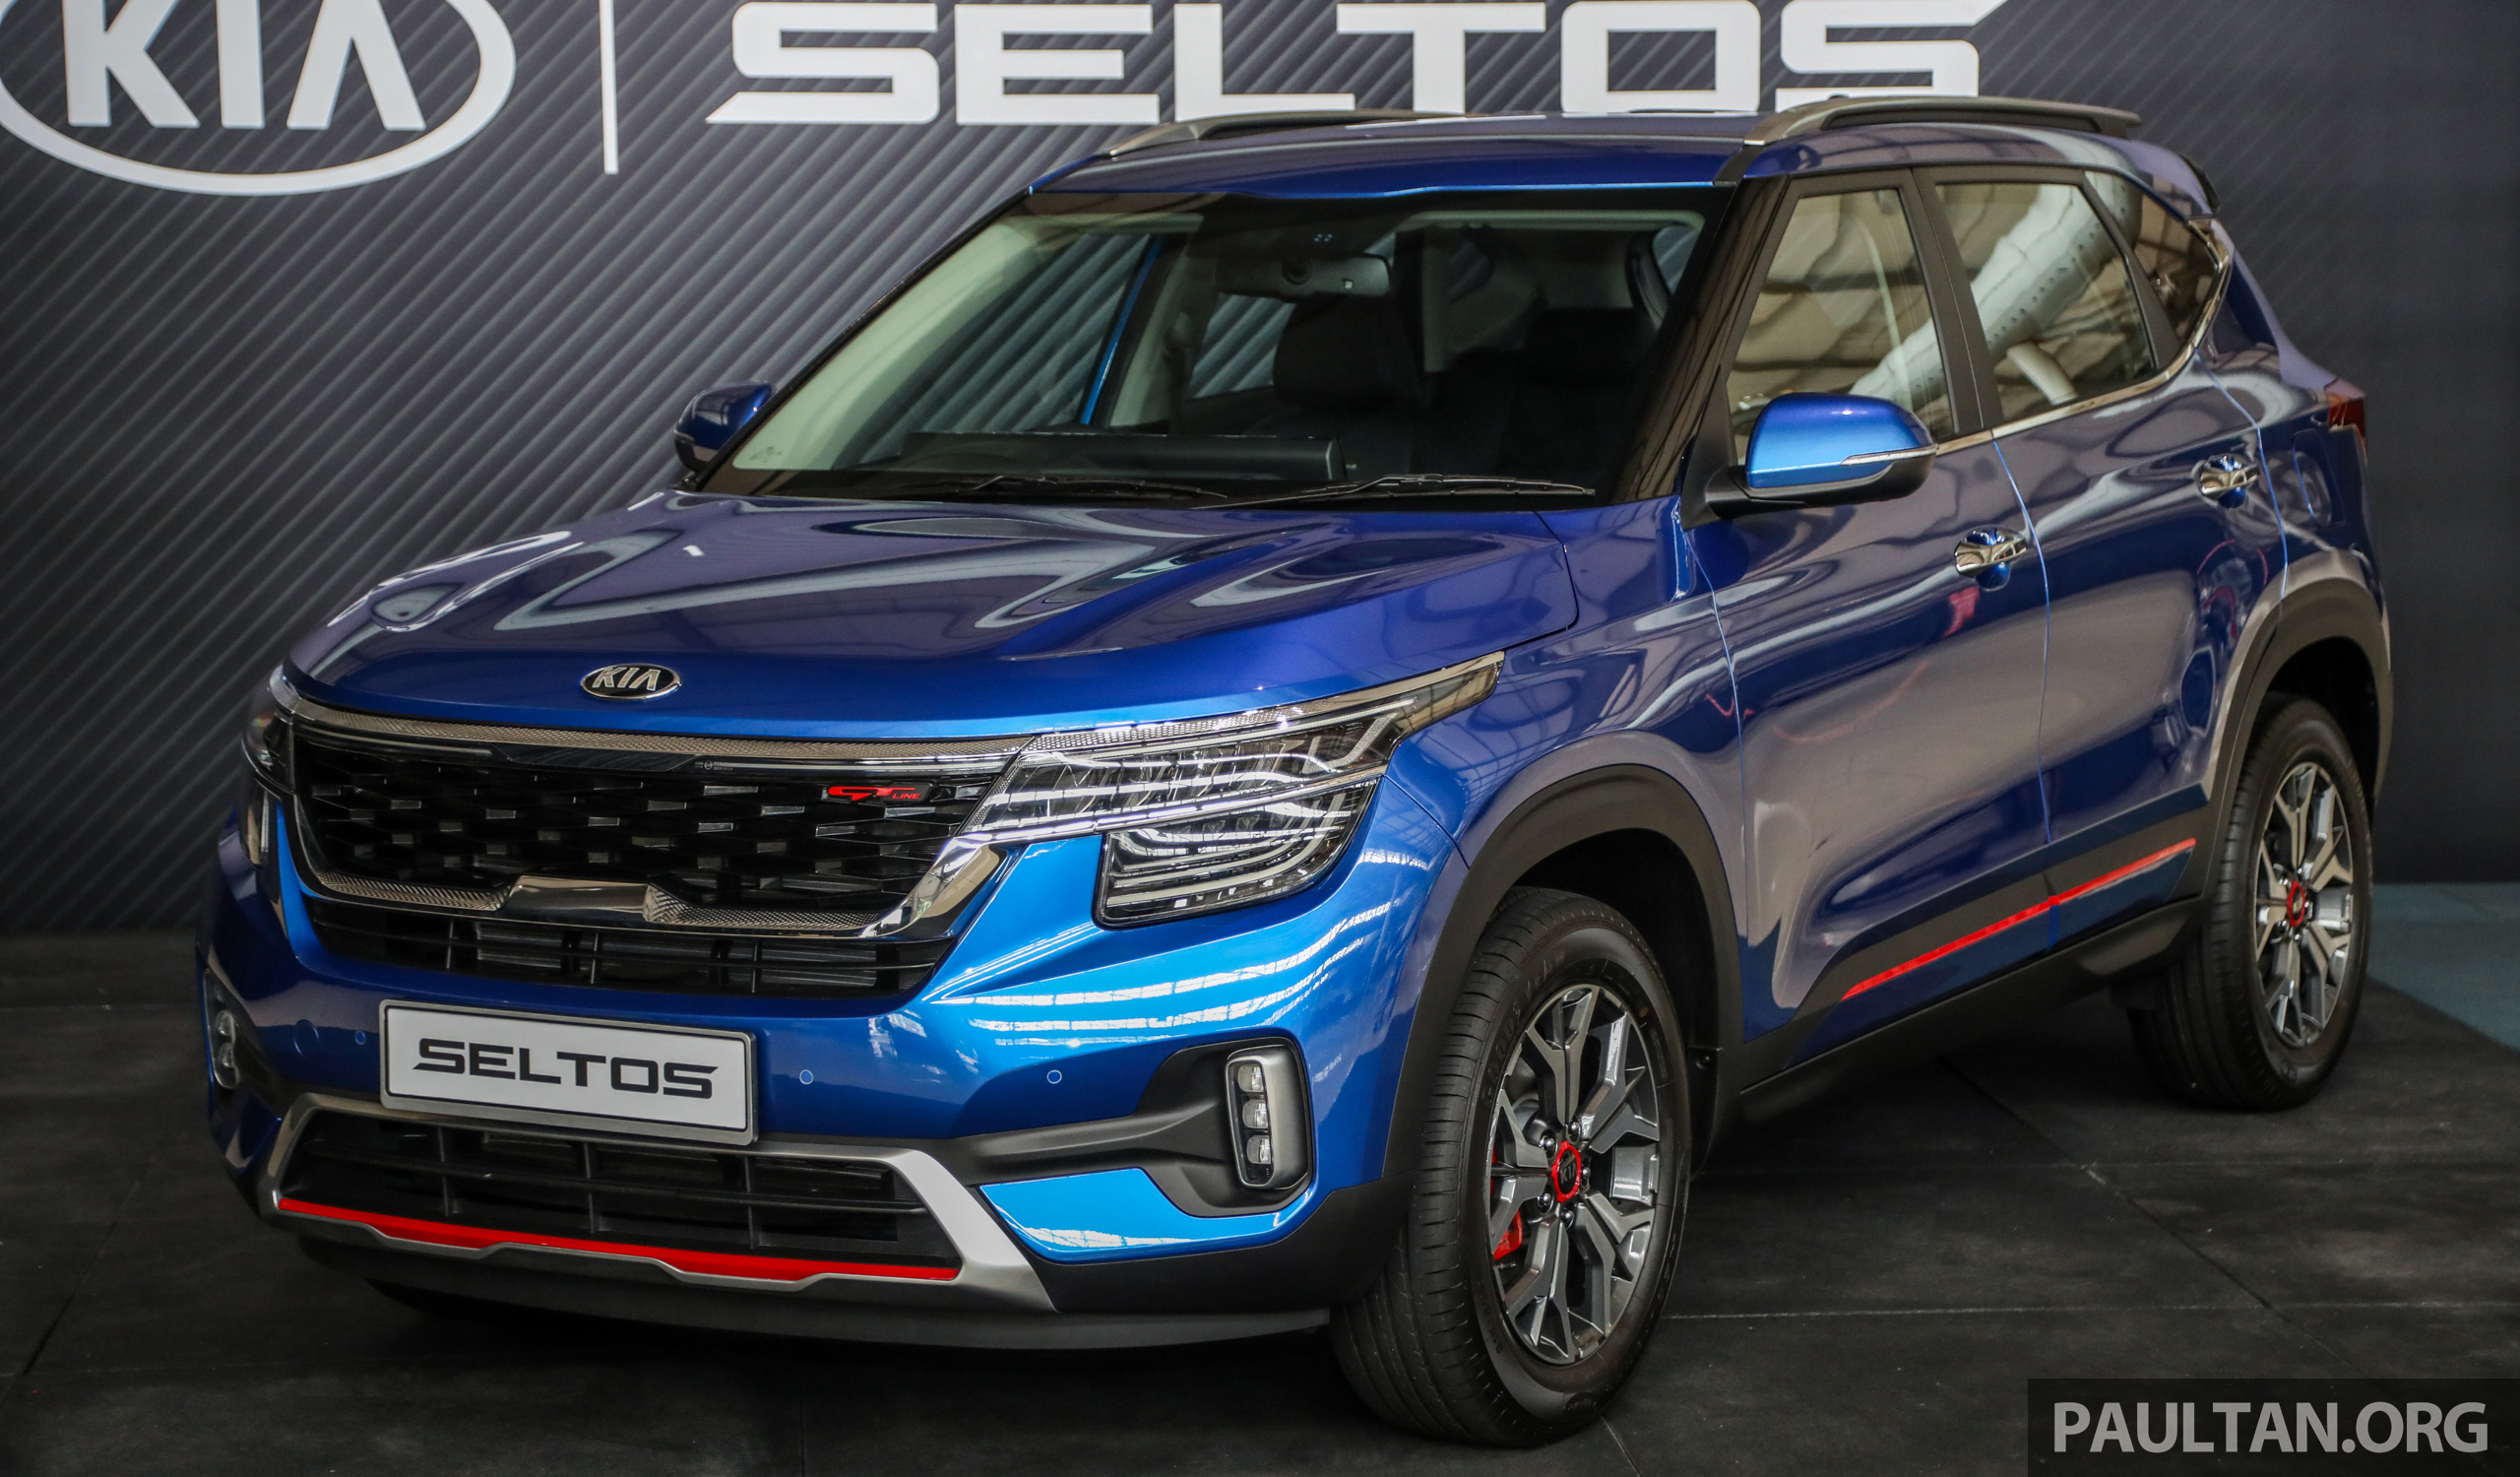 2020 Kia Seltos officially previewed in Malaysia – B-seg SUV with 1.6L